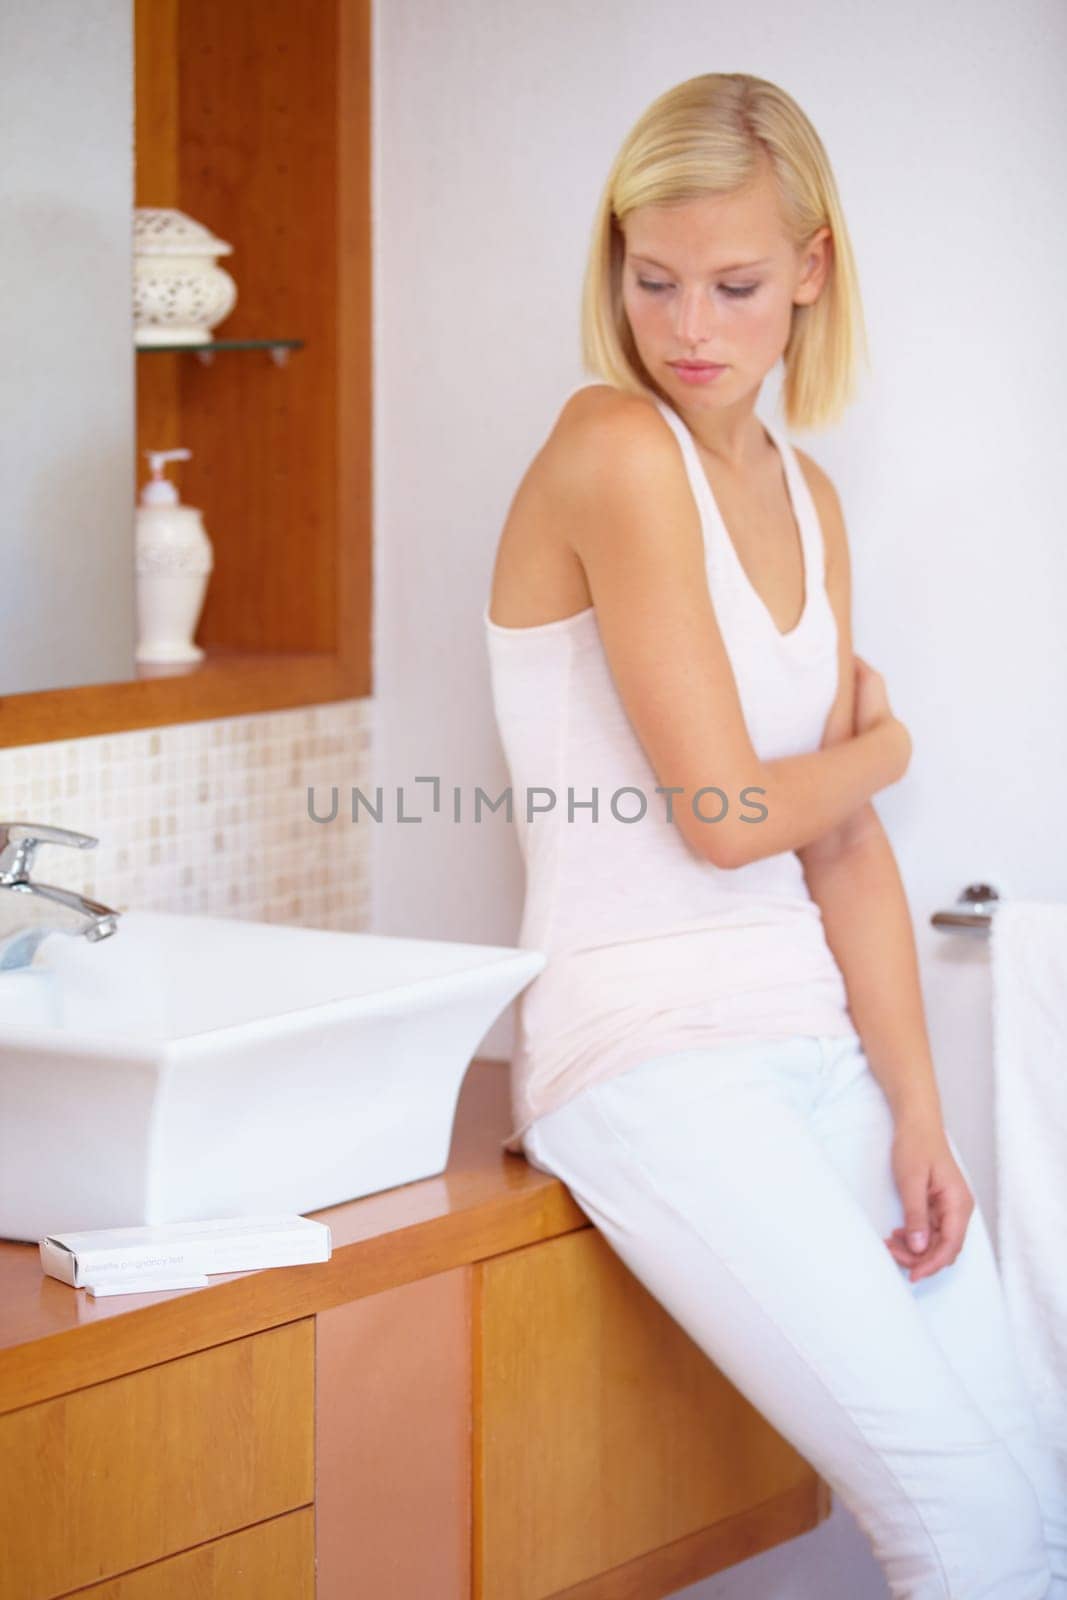 Worry, anxiety and woman with pregnancy test in bathroom waiting for results, news and information. Motherhood, pregnant and sad person with medical testing kit for fertility or ovulation at home by YuriArcurs